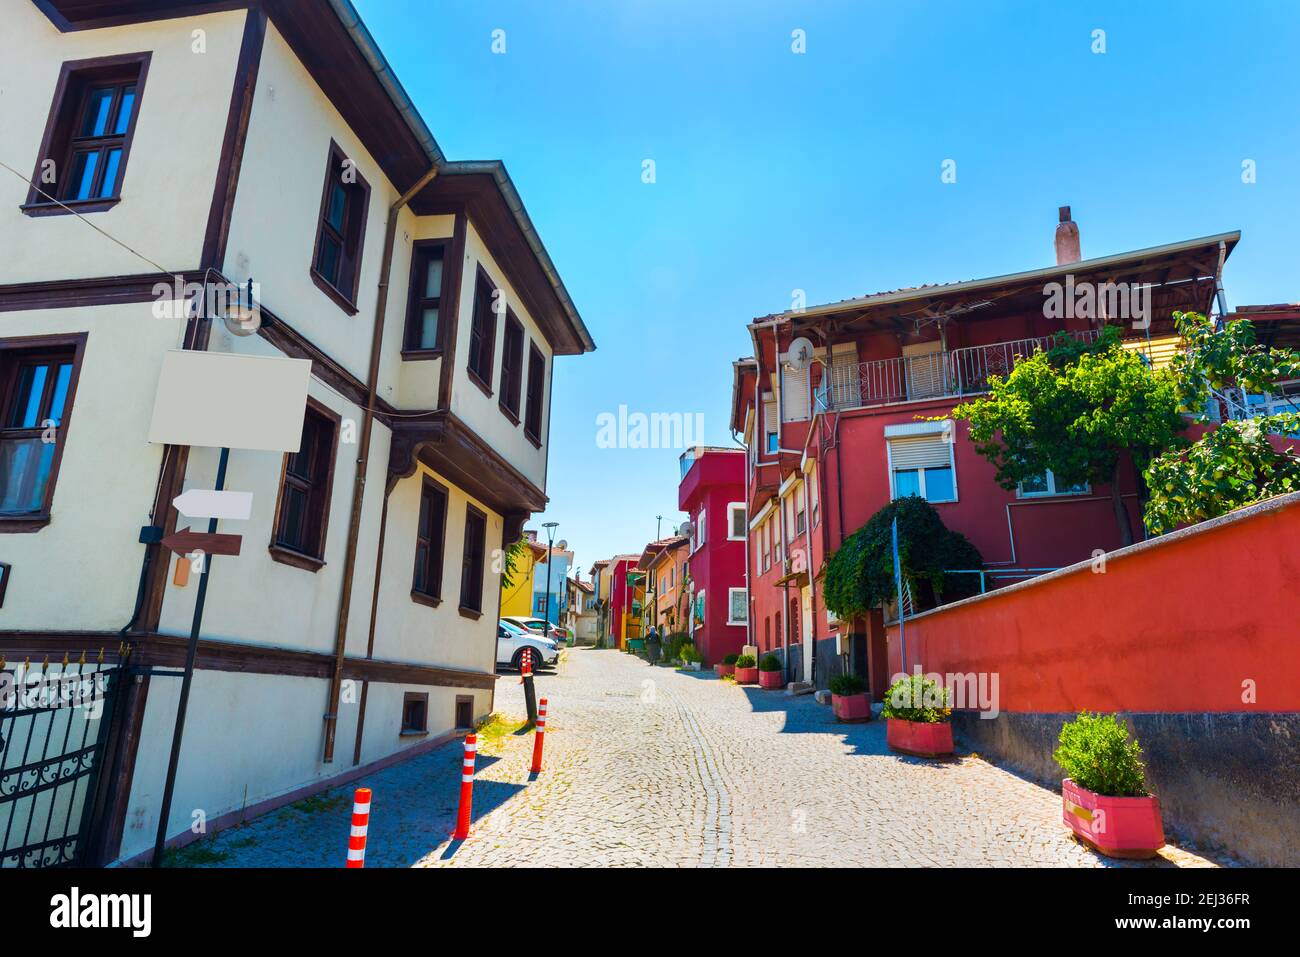 Colorful old houses in Odunpazari. Traditional historical houses in Odunpazari, Eskisehir, Turkey. Stock Photo